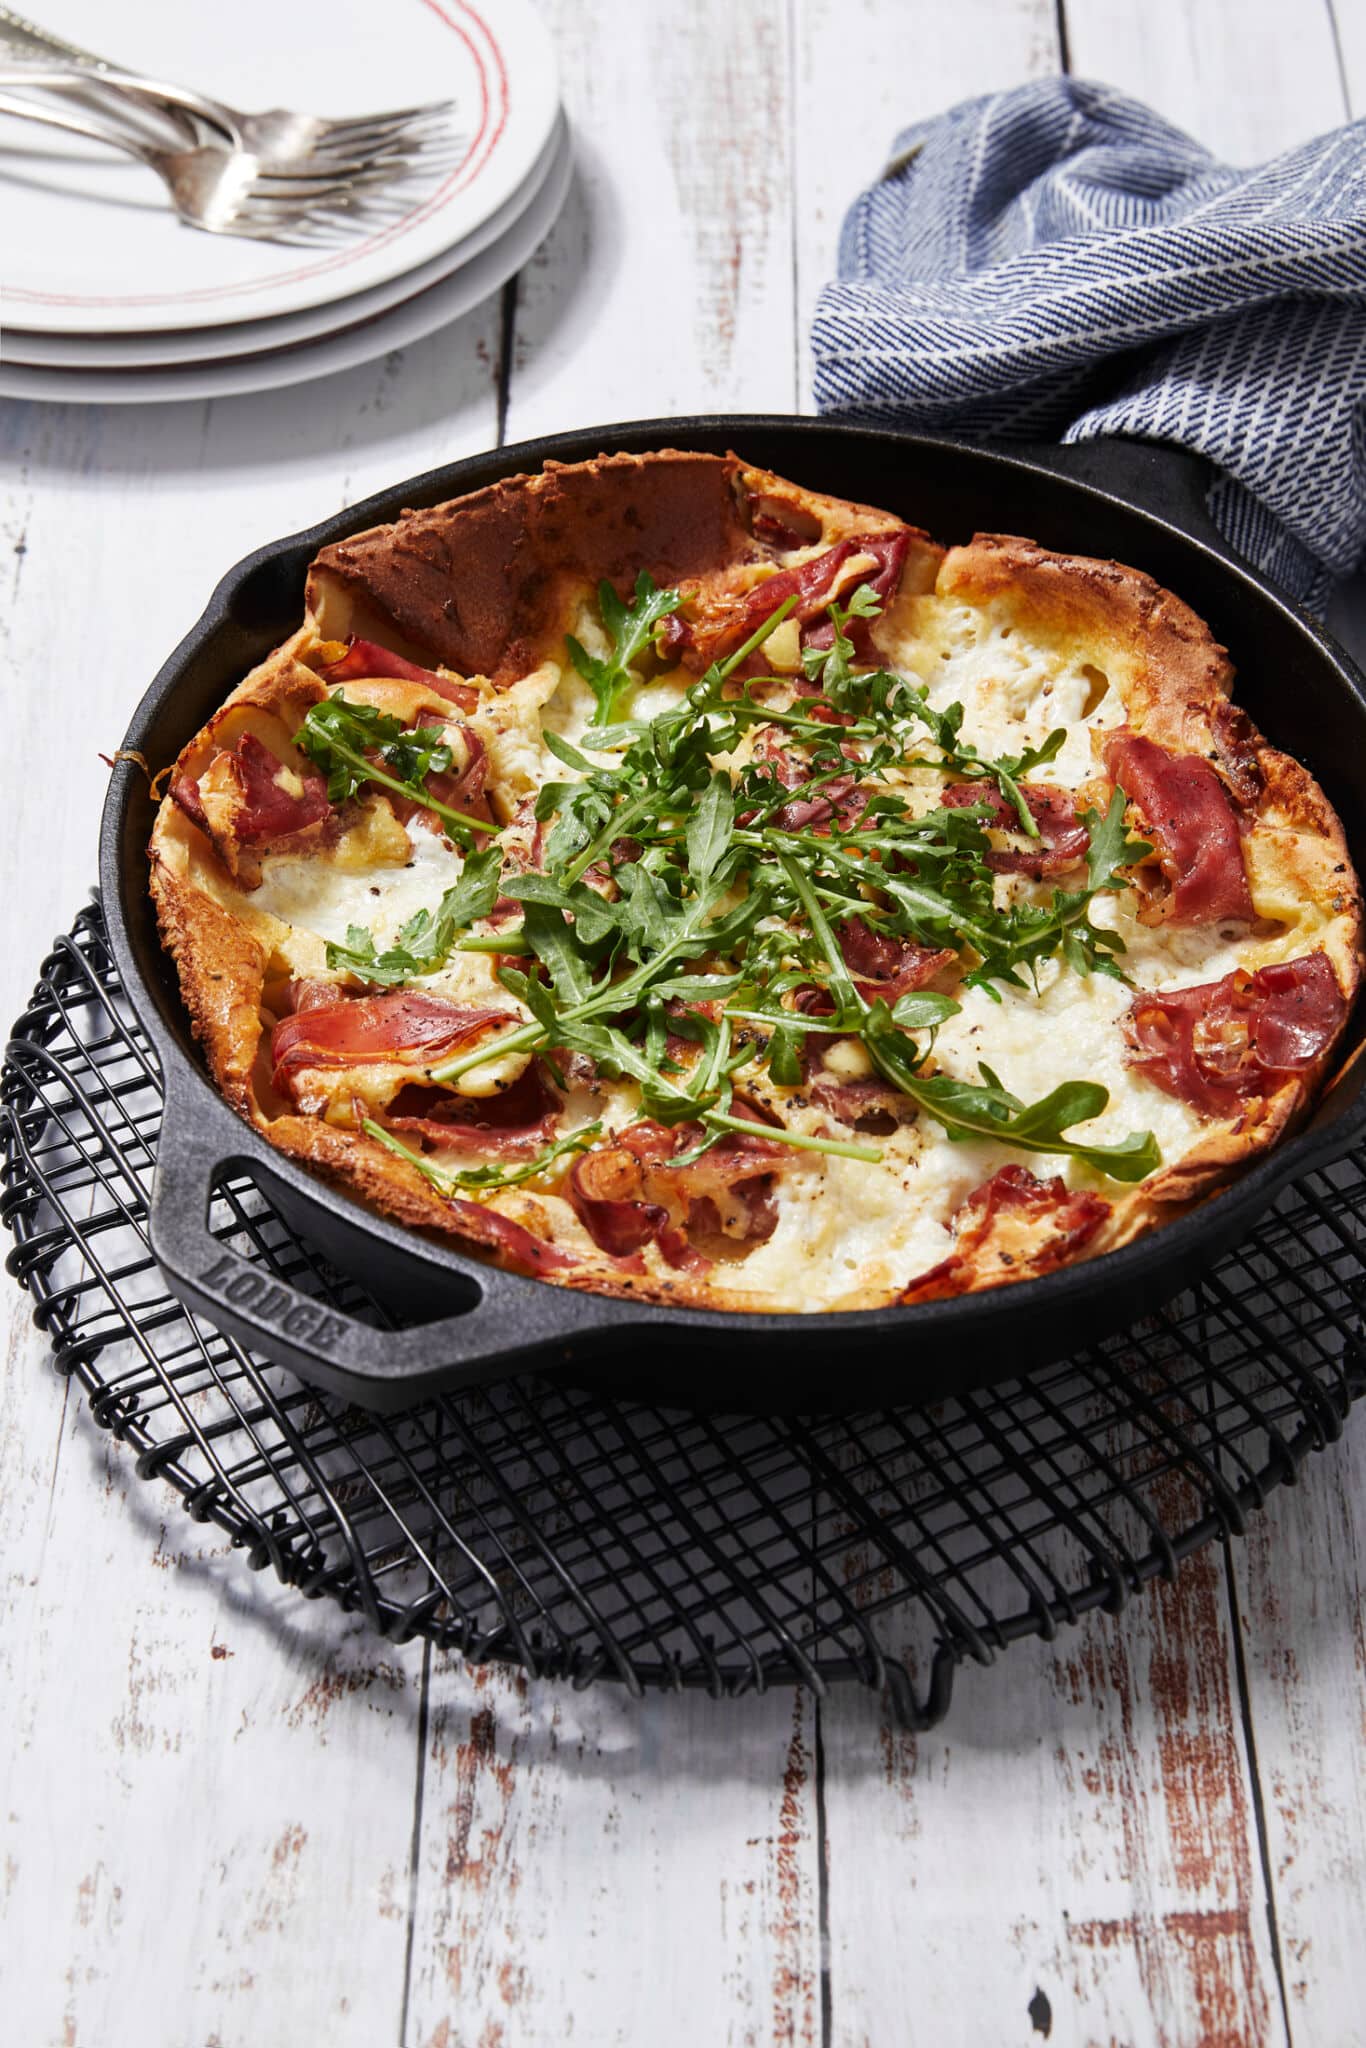 The Dutch Baby is perfectly baked in a cast iron skillet cooling on a black wire rack. The pancake has golden crispy edges, soft silky custard cheese center, toped with savory prosciutto and fresh green arugula. 3 sets of plates and silverware are in the top left corner for serving.